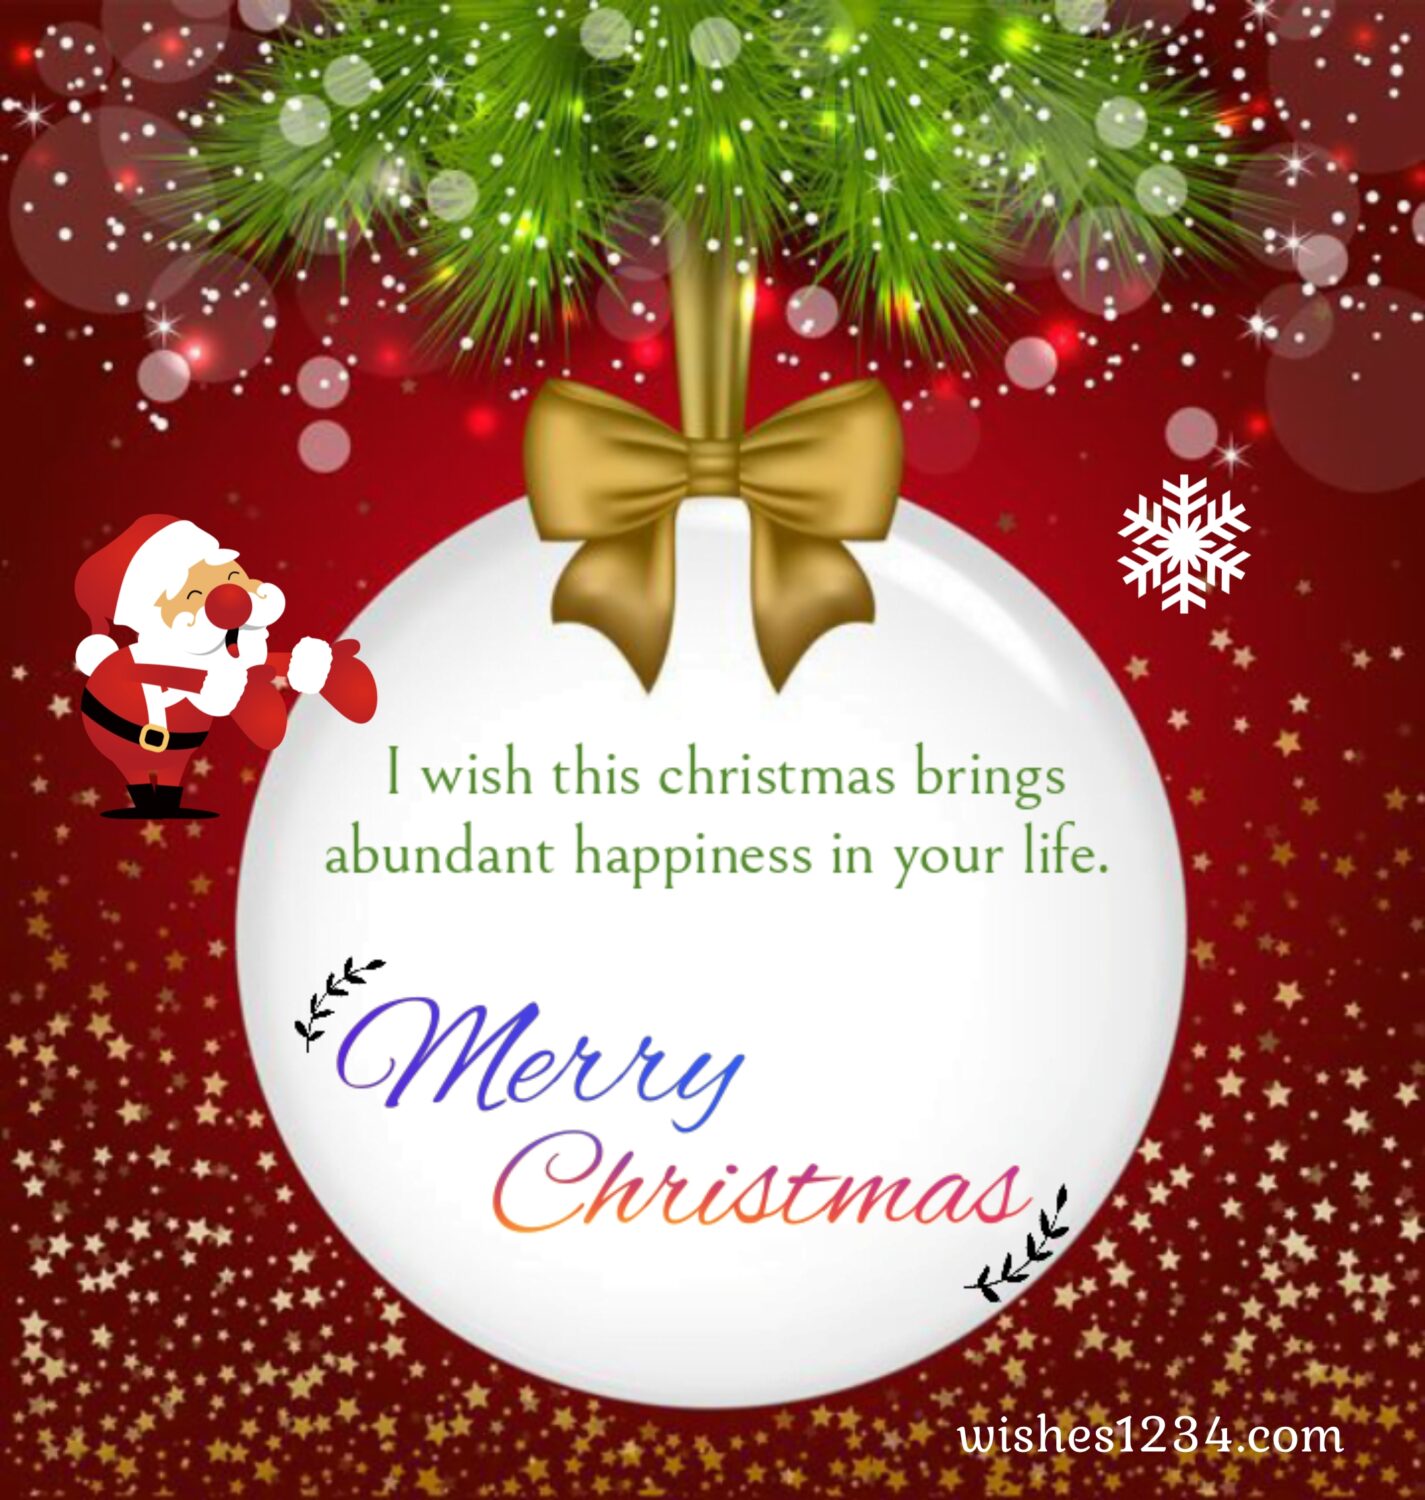 Christmas greetings on decoration, Merry Christmas Quotes & short wishes.